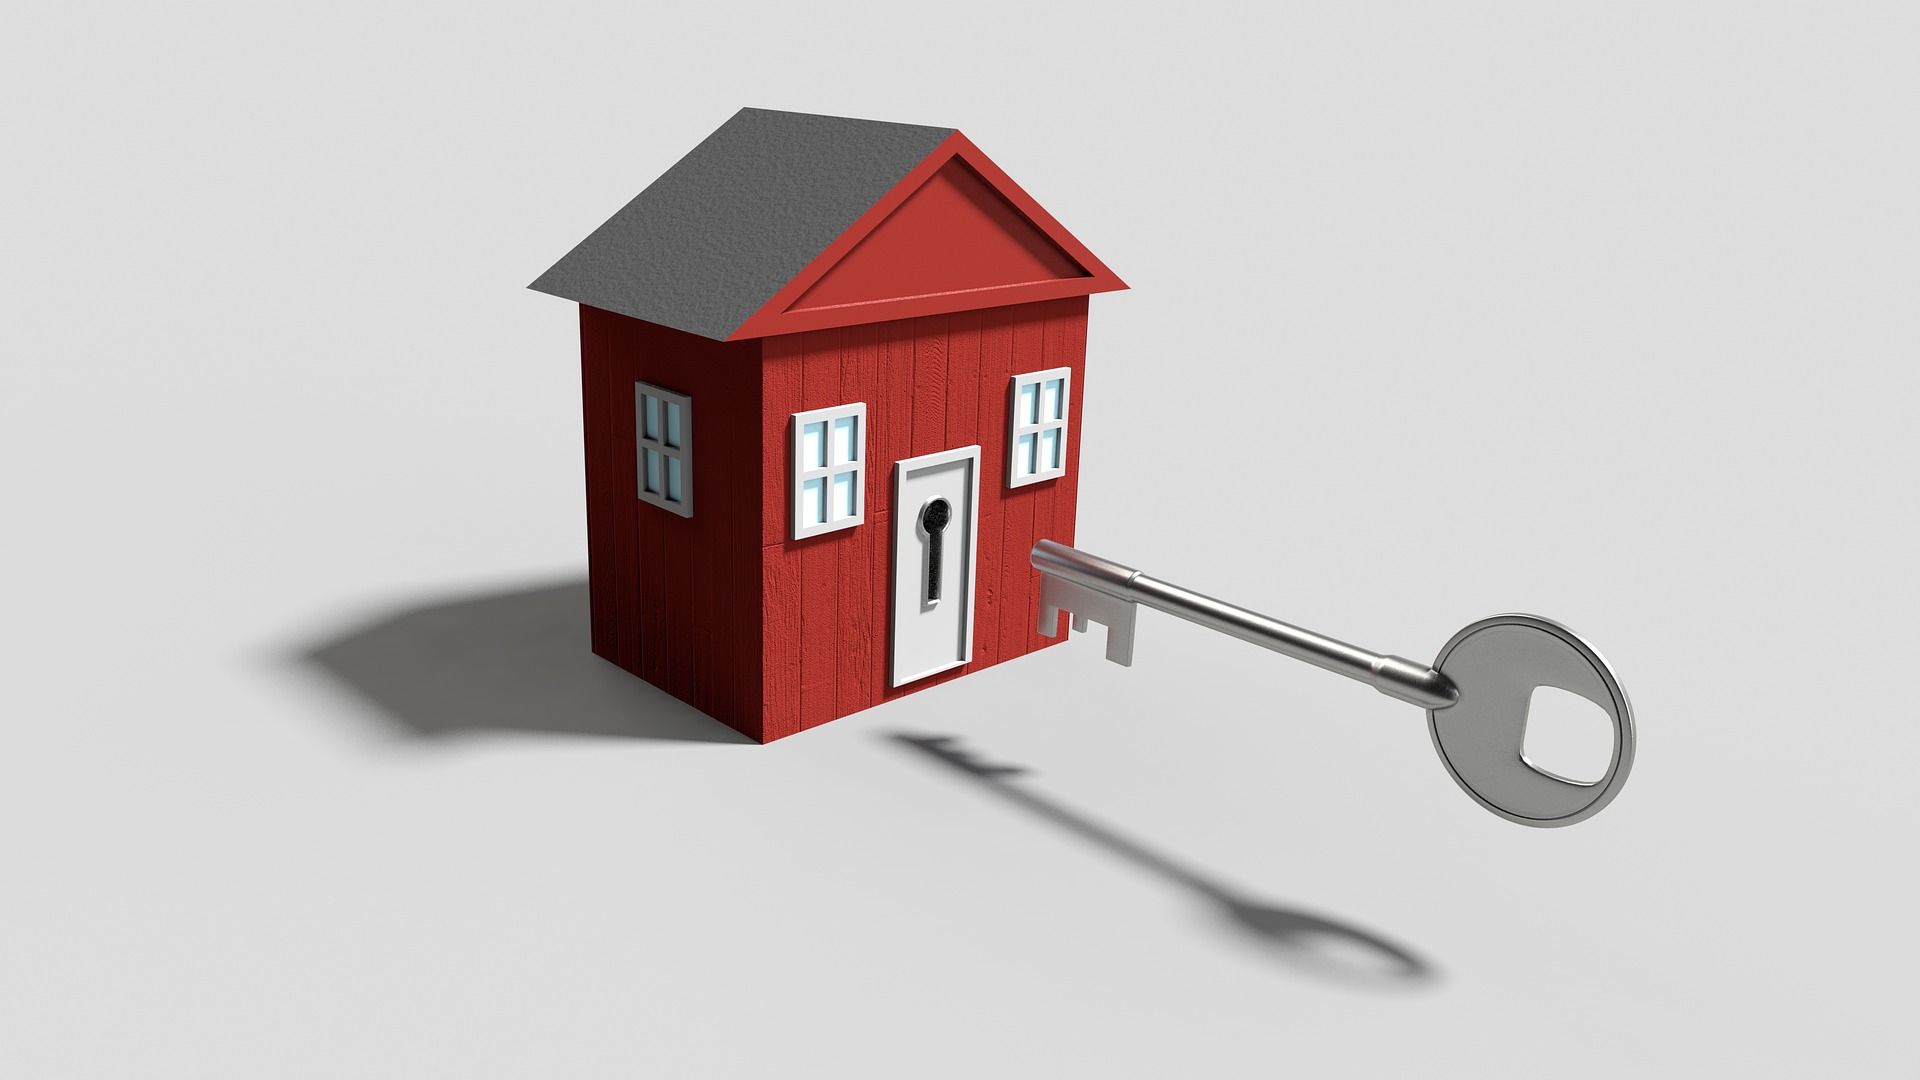 House and key as a representation of mortgage